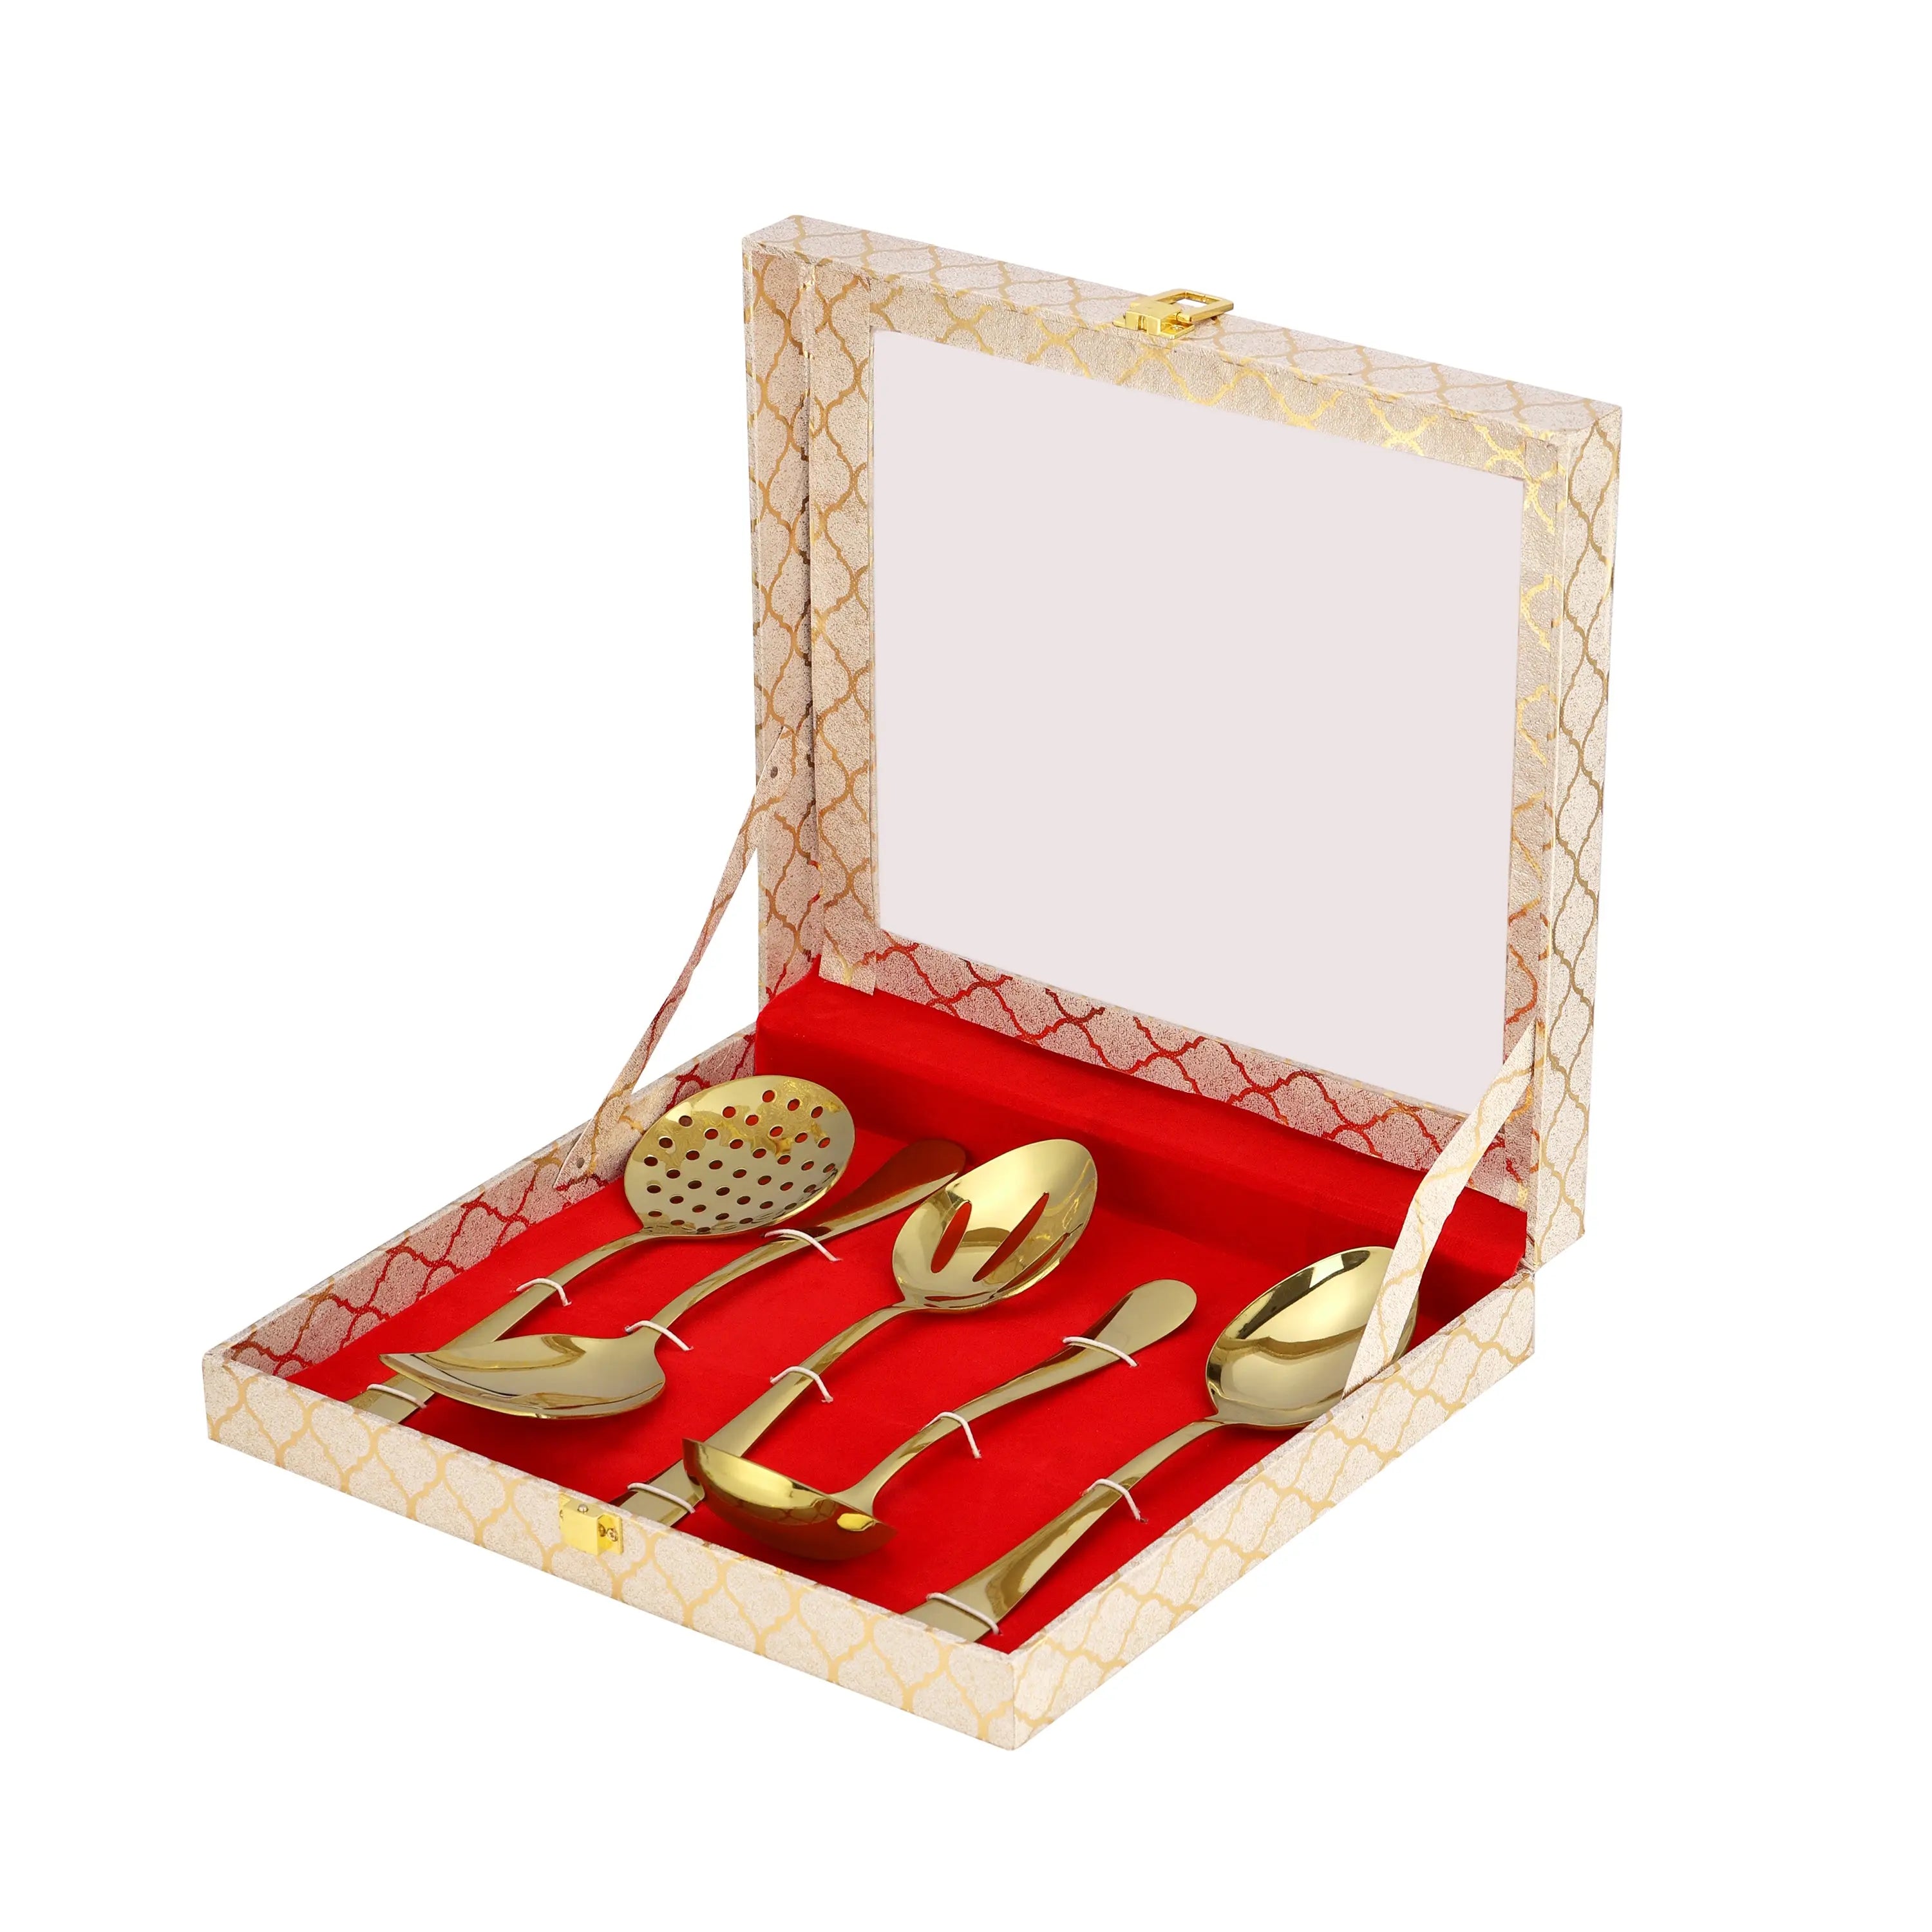 STAINLESS STEEL GOLD PVD 12 G TOOL SET - 5 PCS WITH VELVET BOX - CROCKERY WALA AND COMPANY 